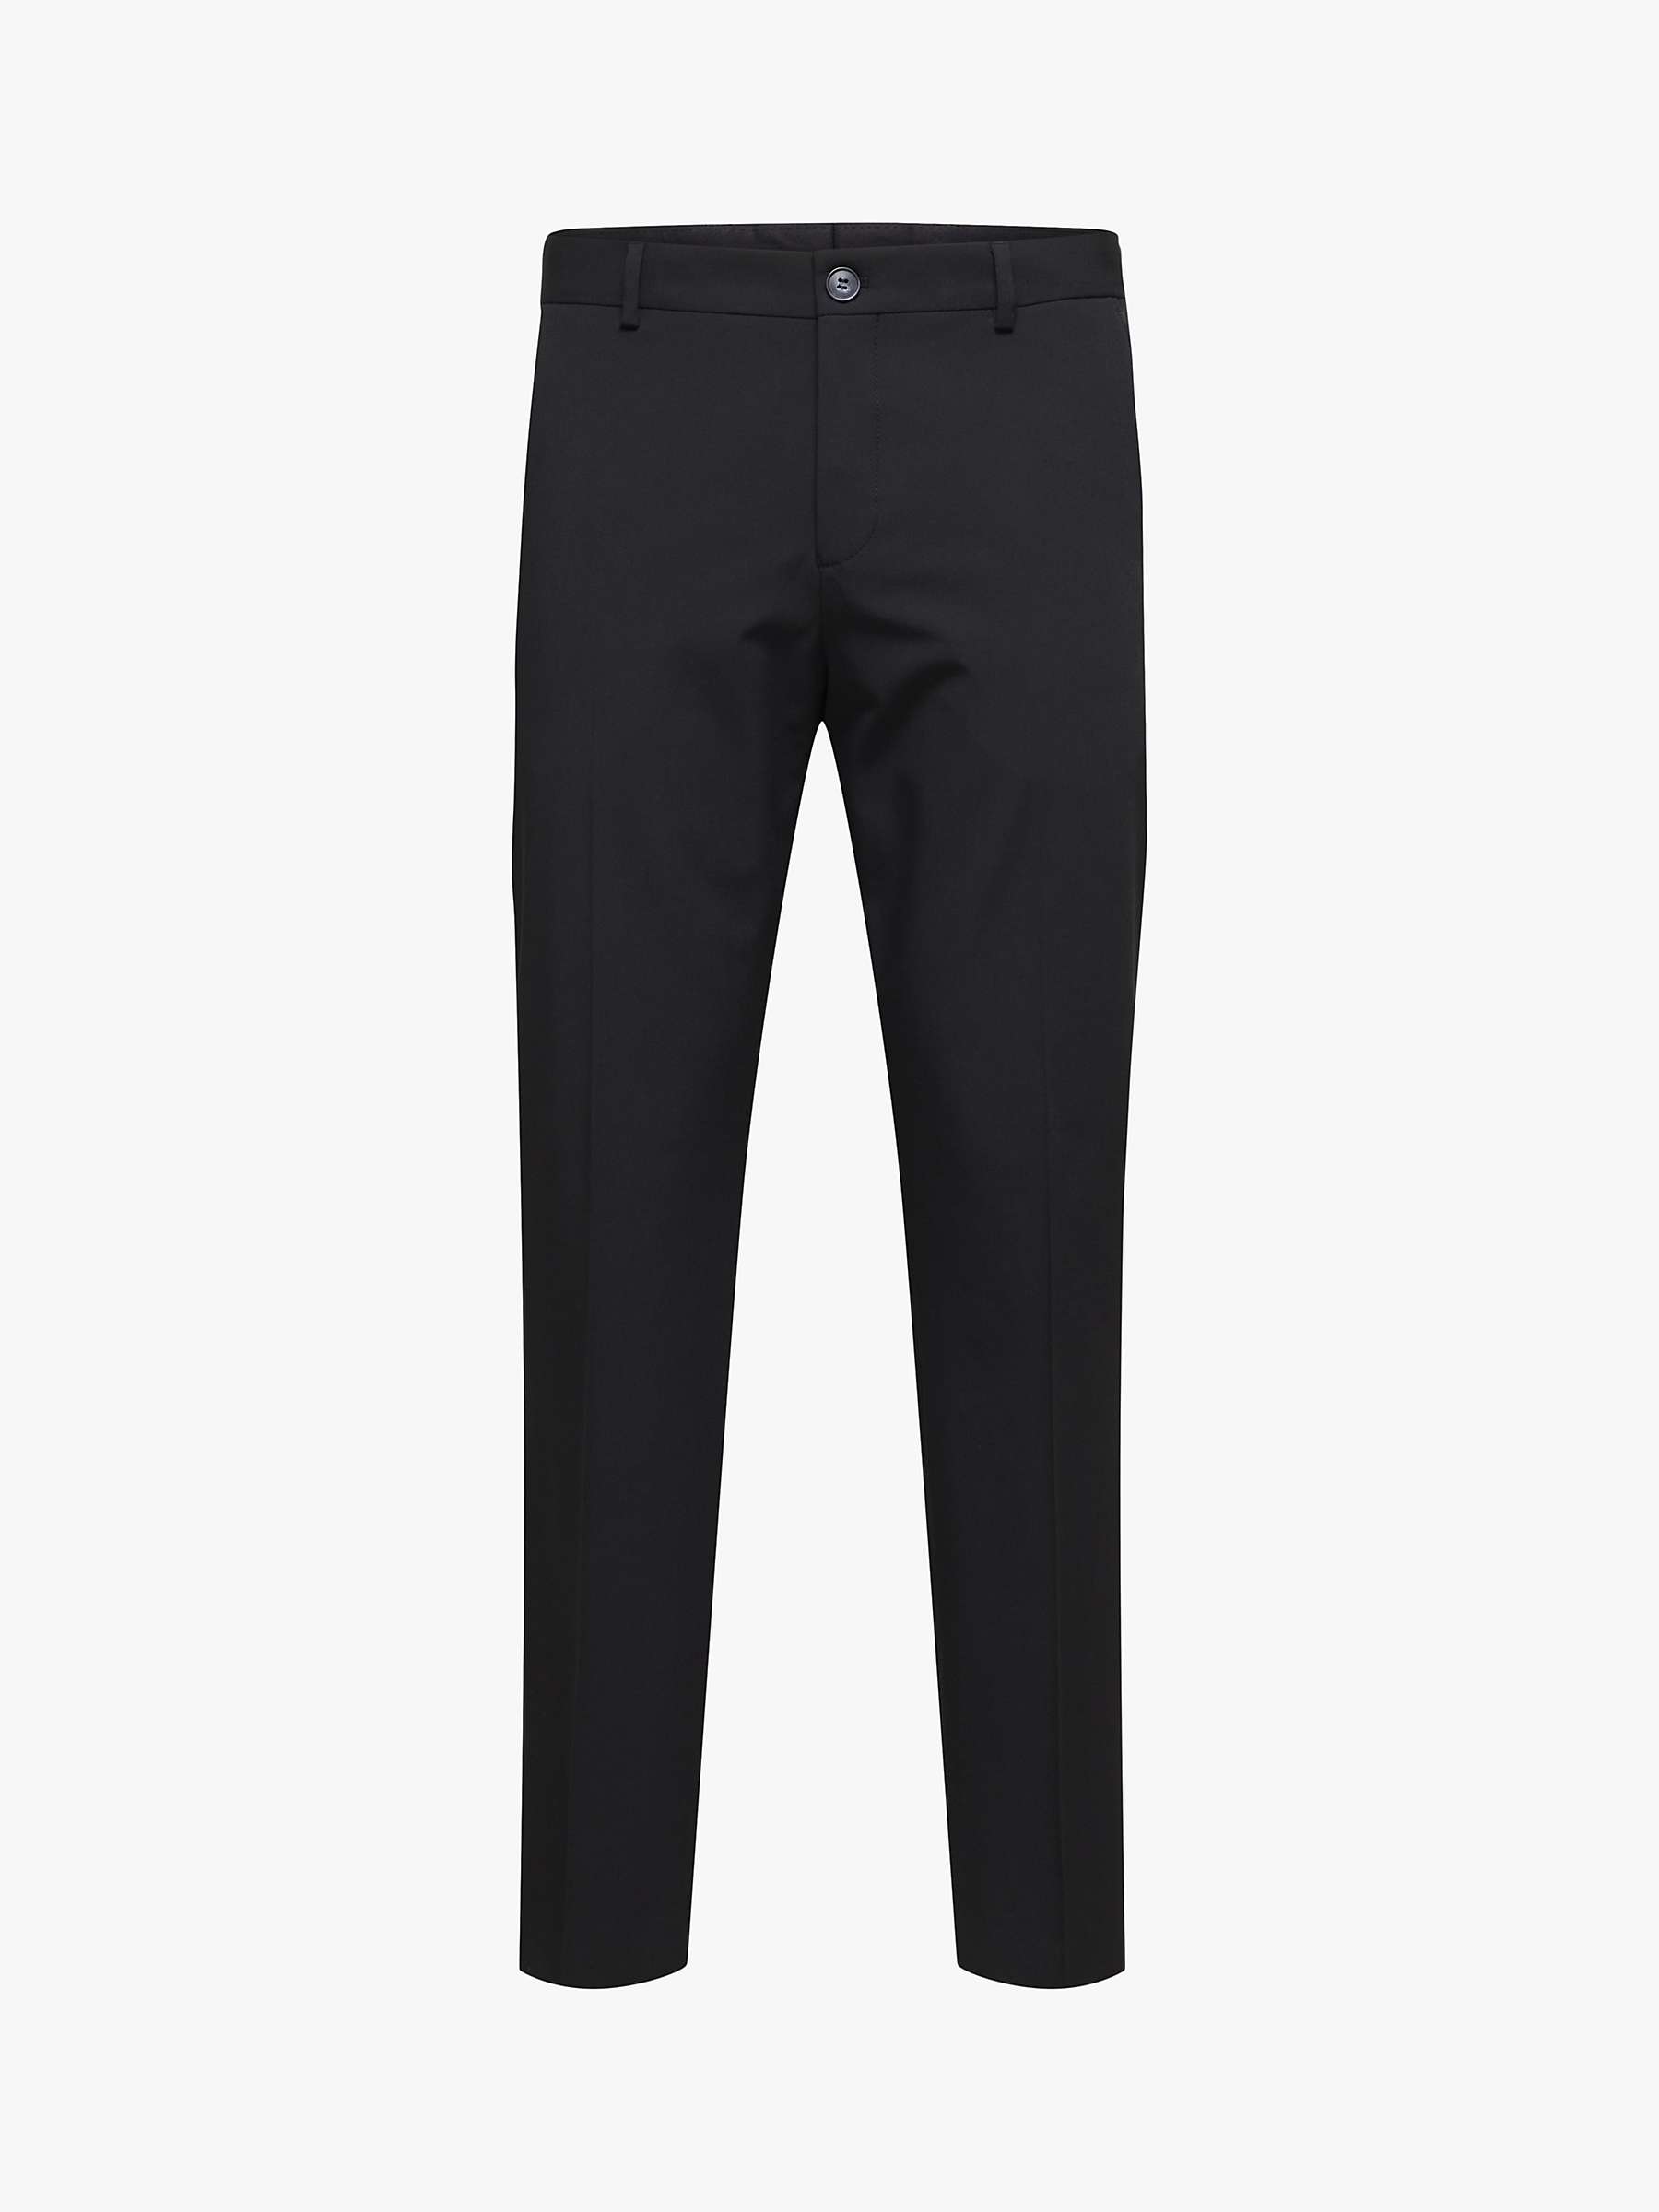 Buy SELECTED HOMME Recycled Polyester Tailored Flex Trousers Online at johnlewis.com